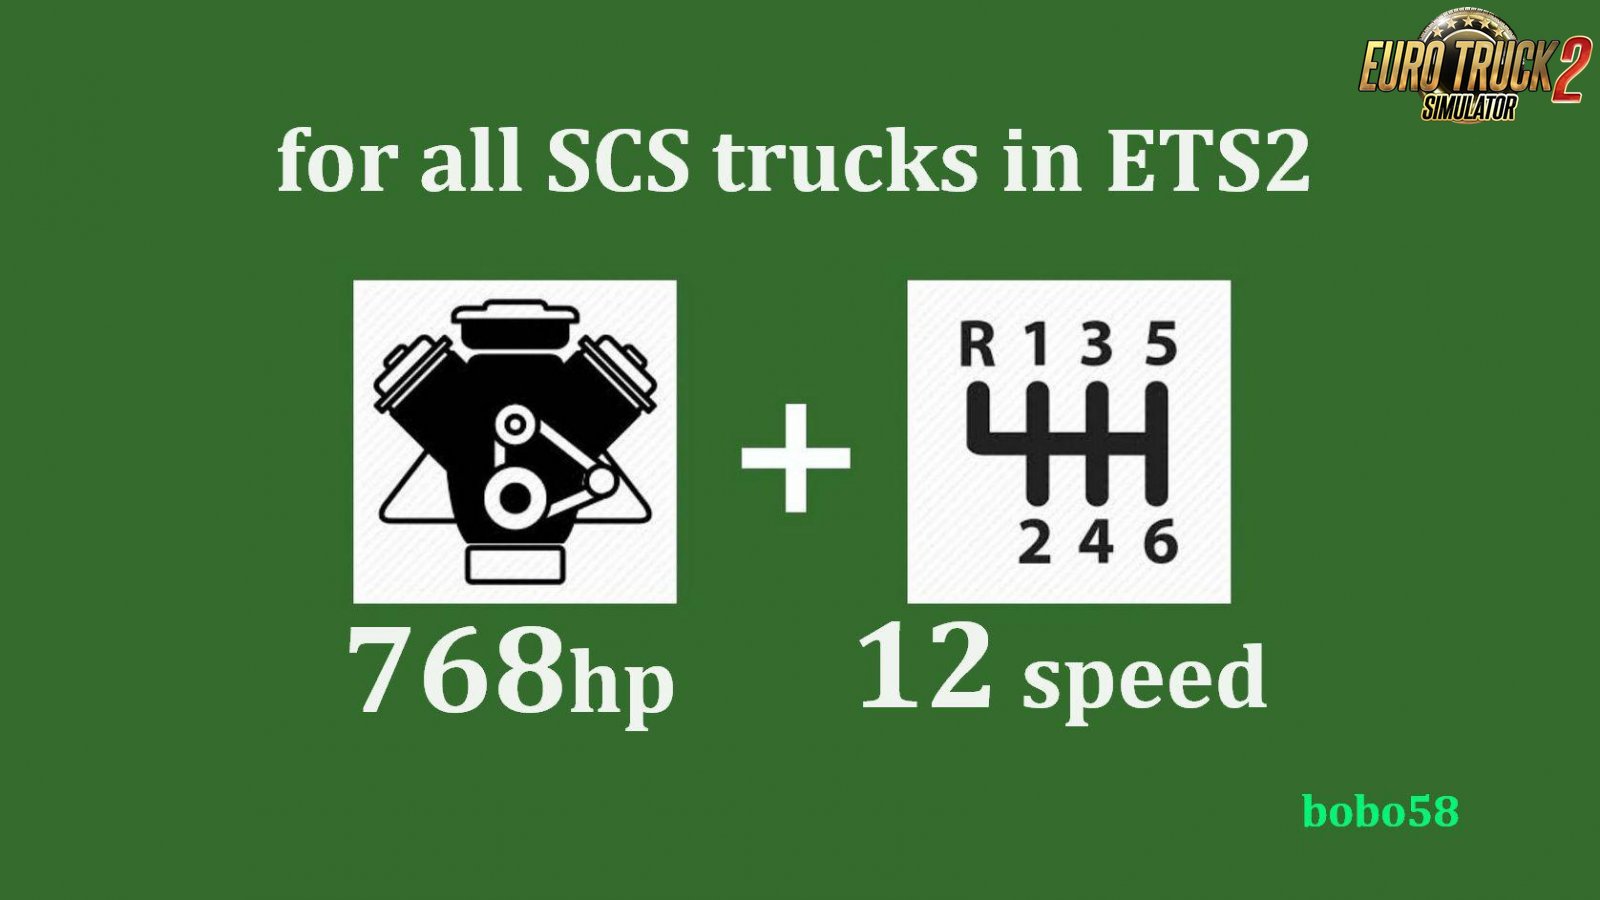 Engine and Gearbox for all SCS trucks